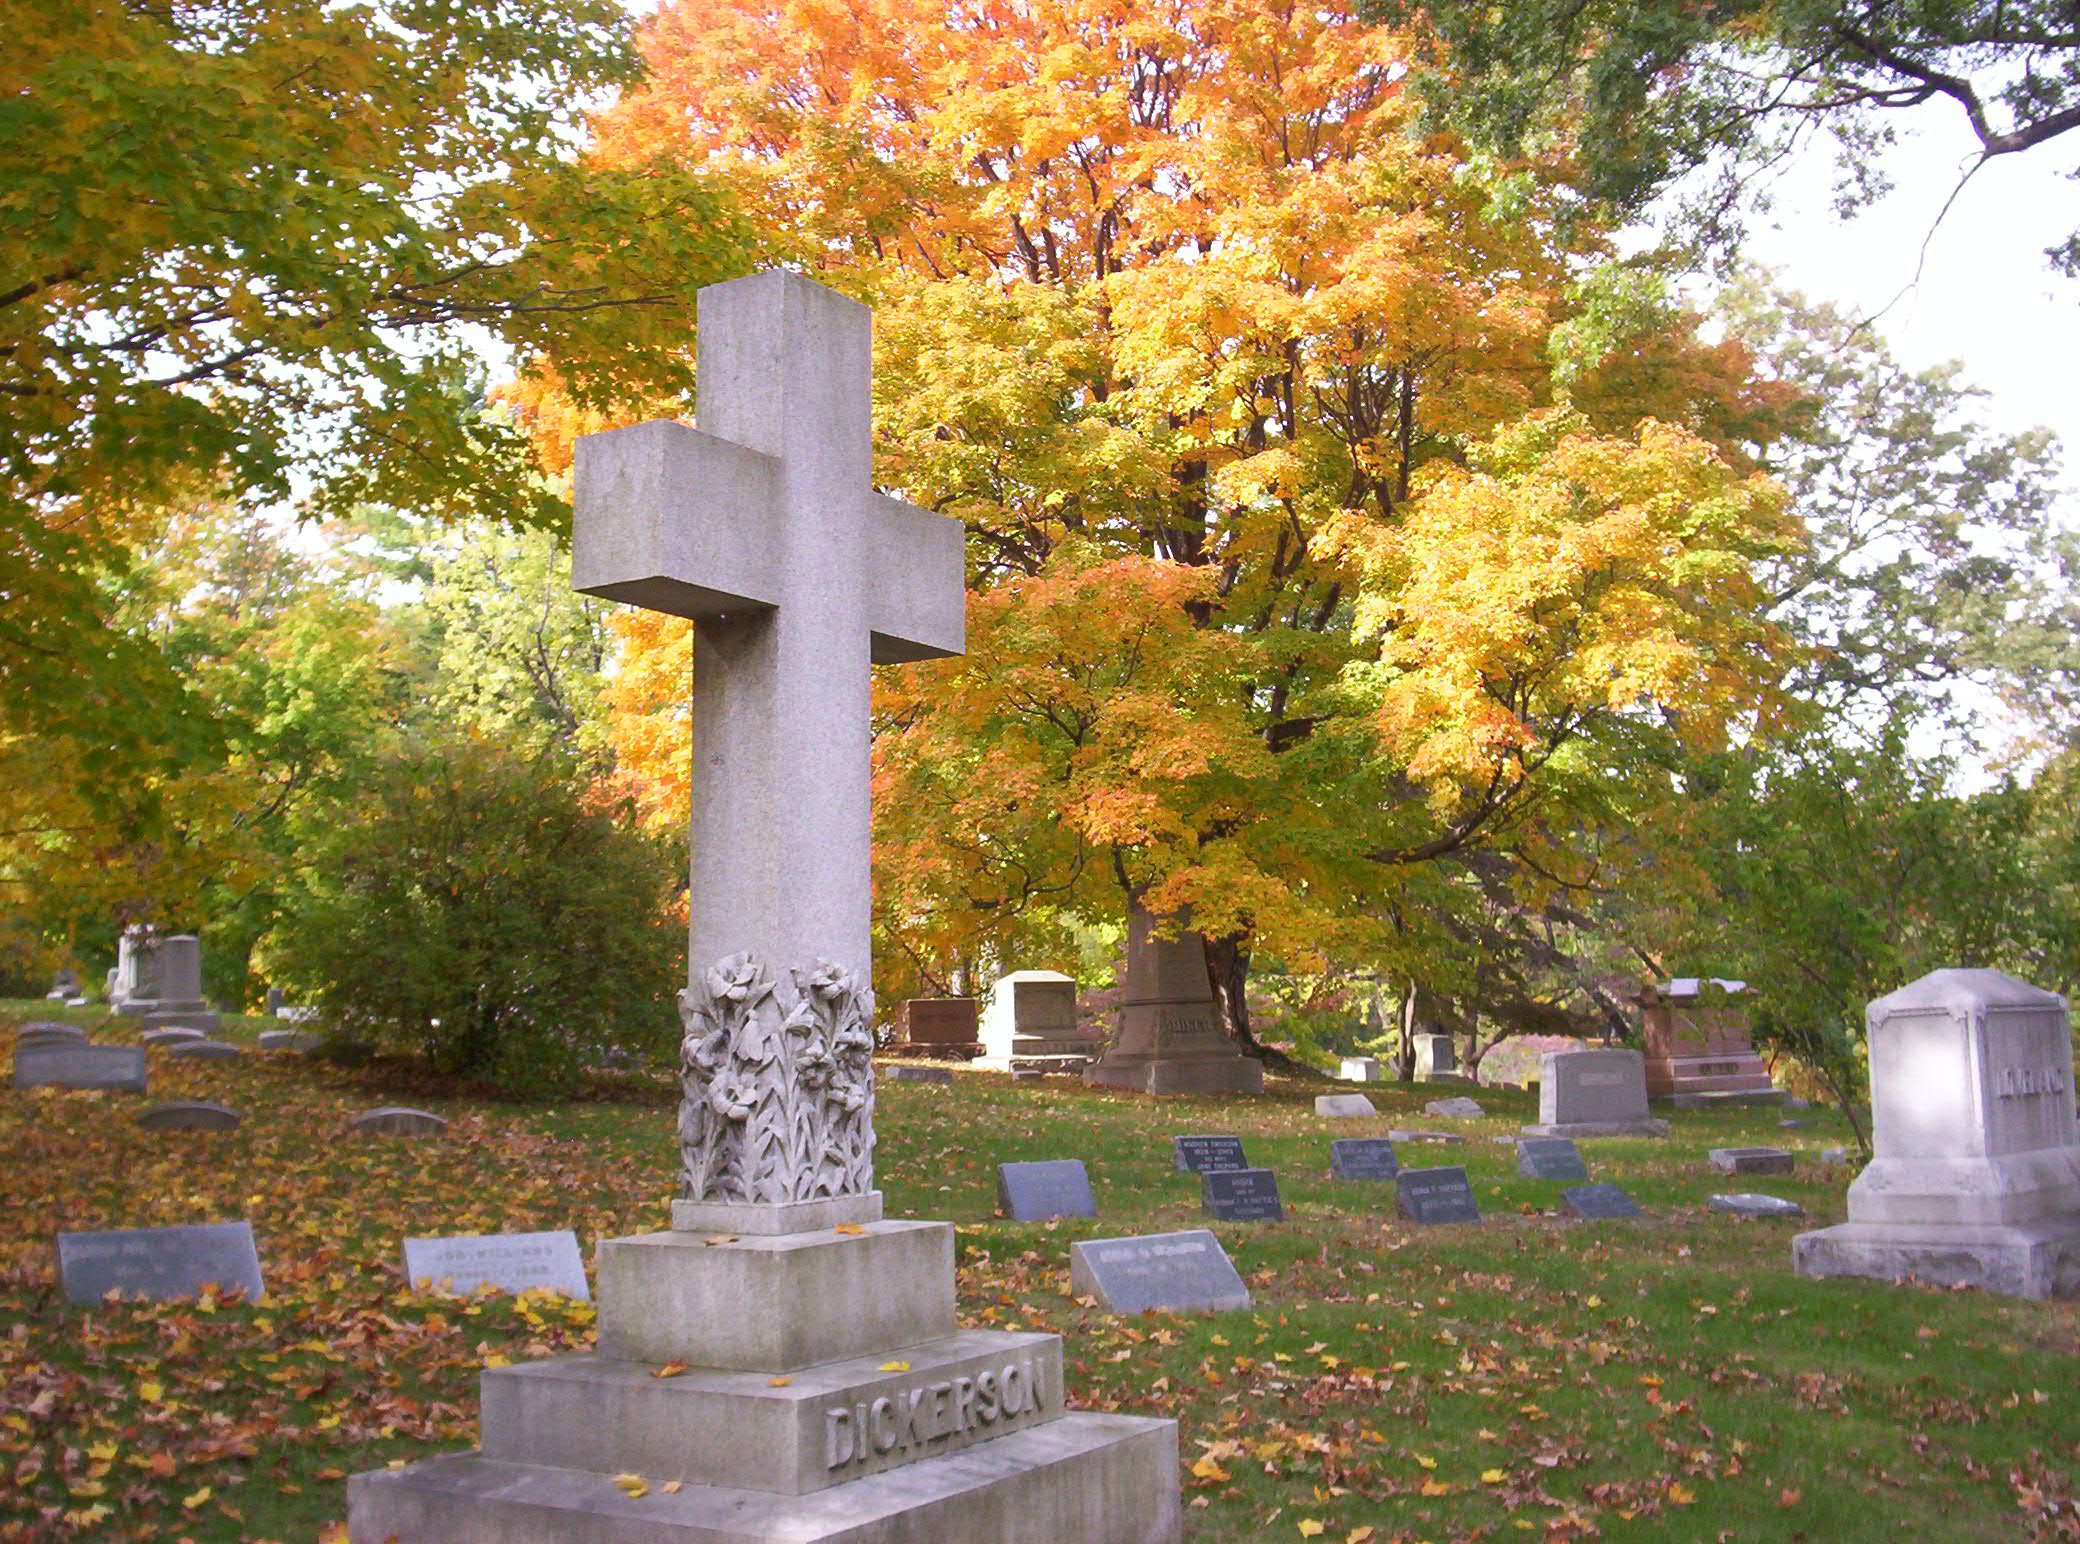 Tall White Cross Against Yellow Foliage (user submitted)